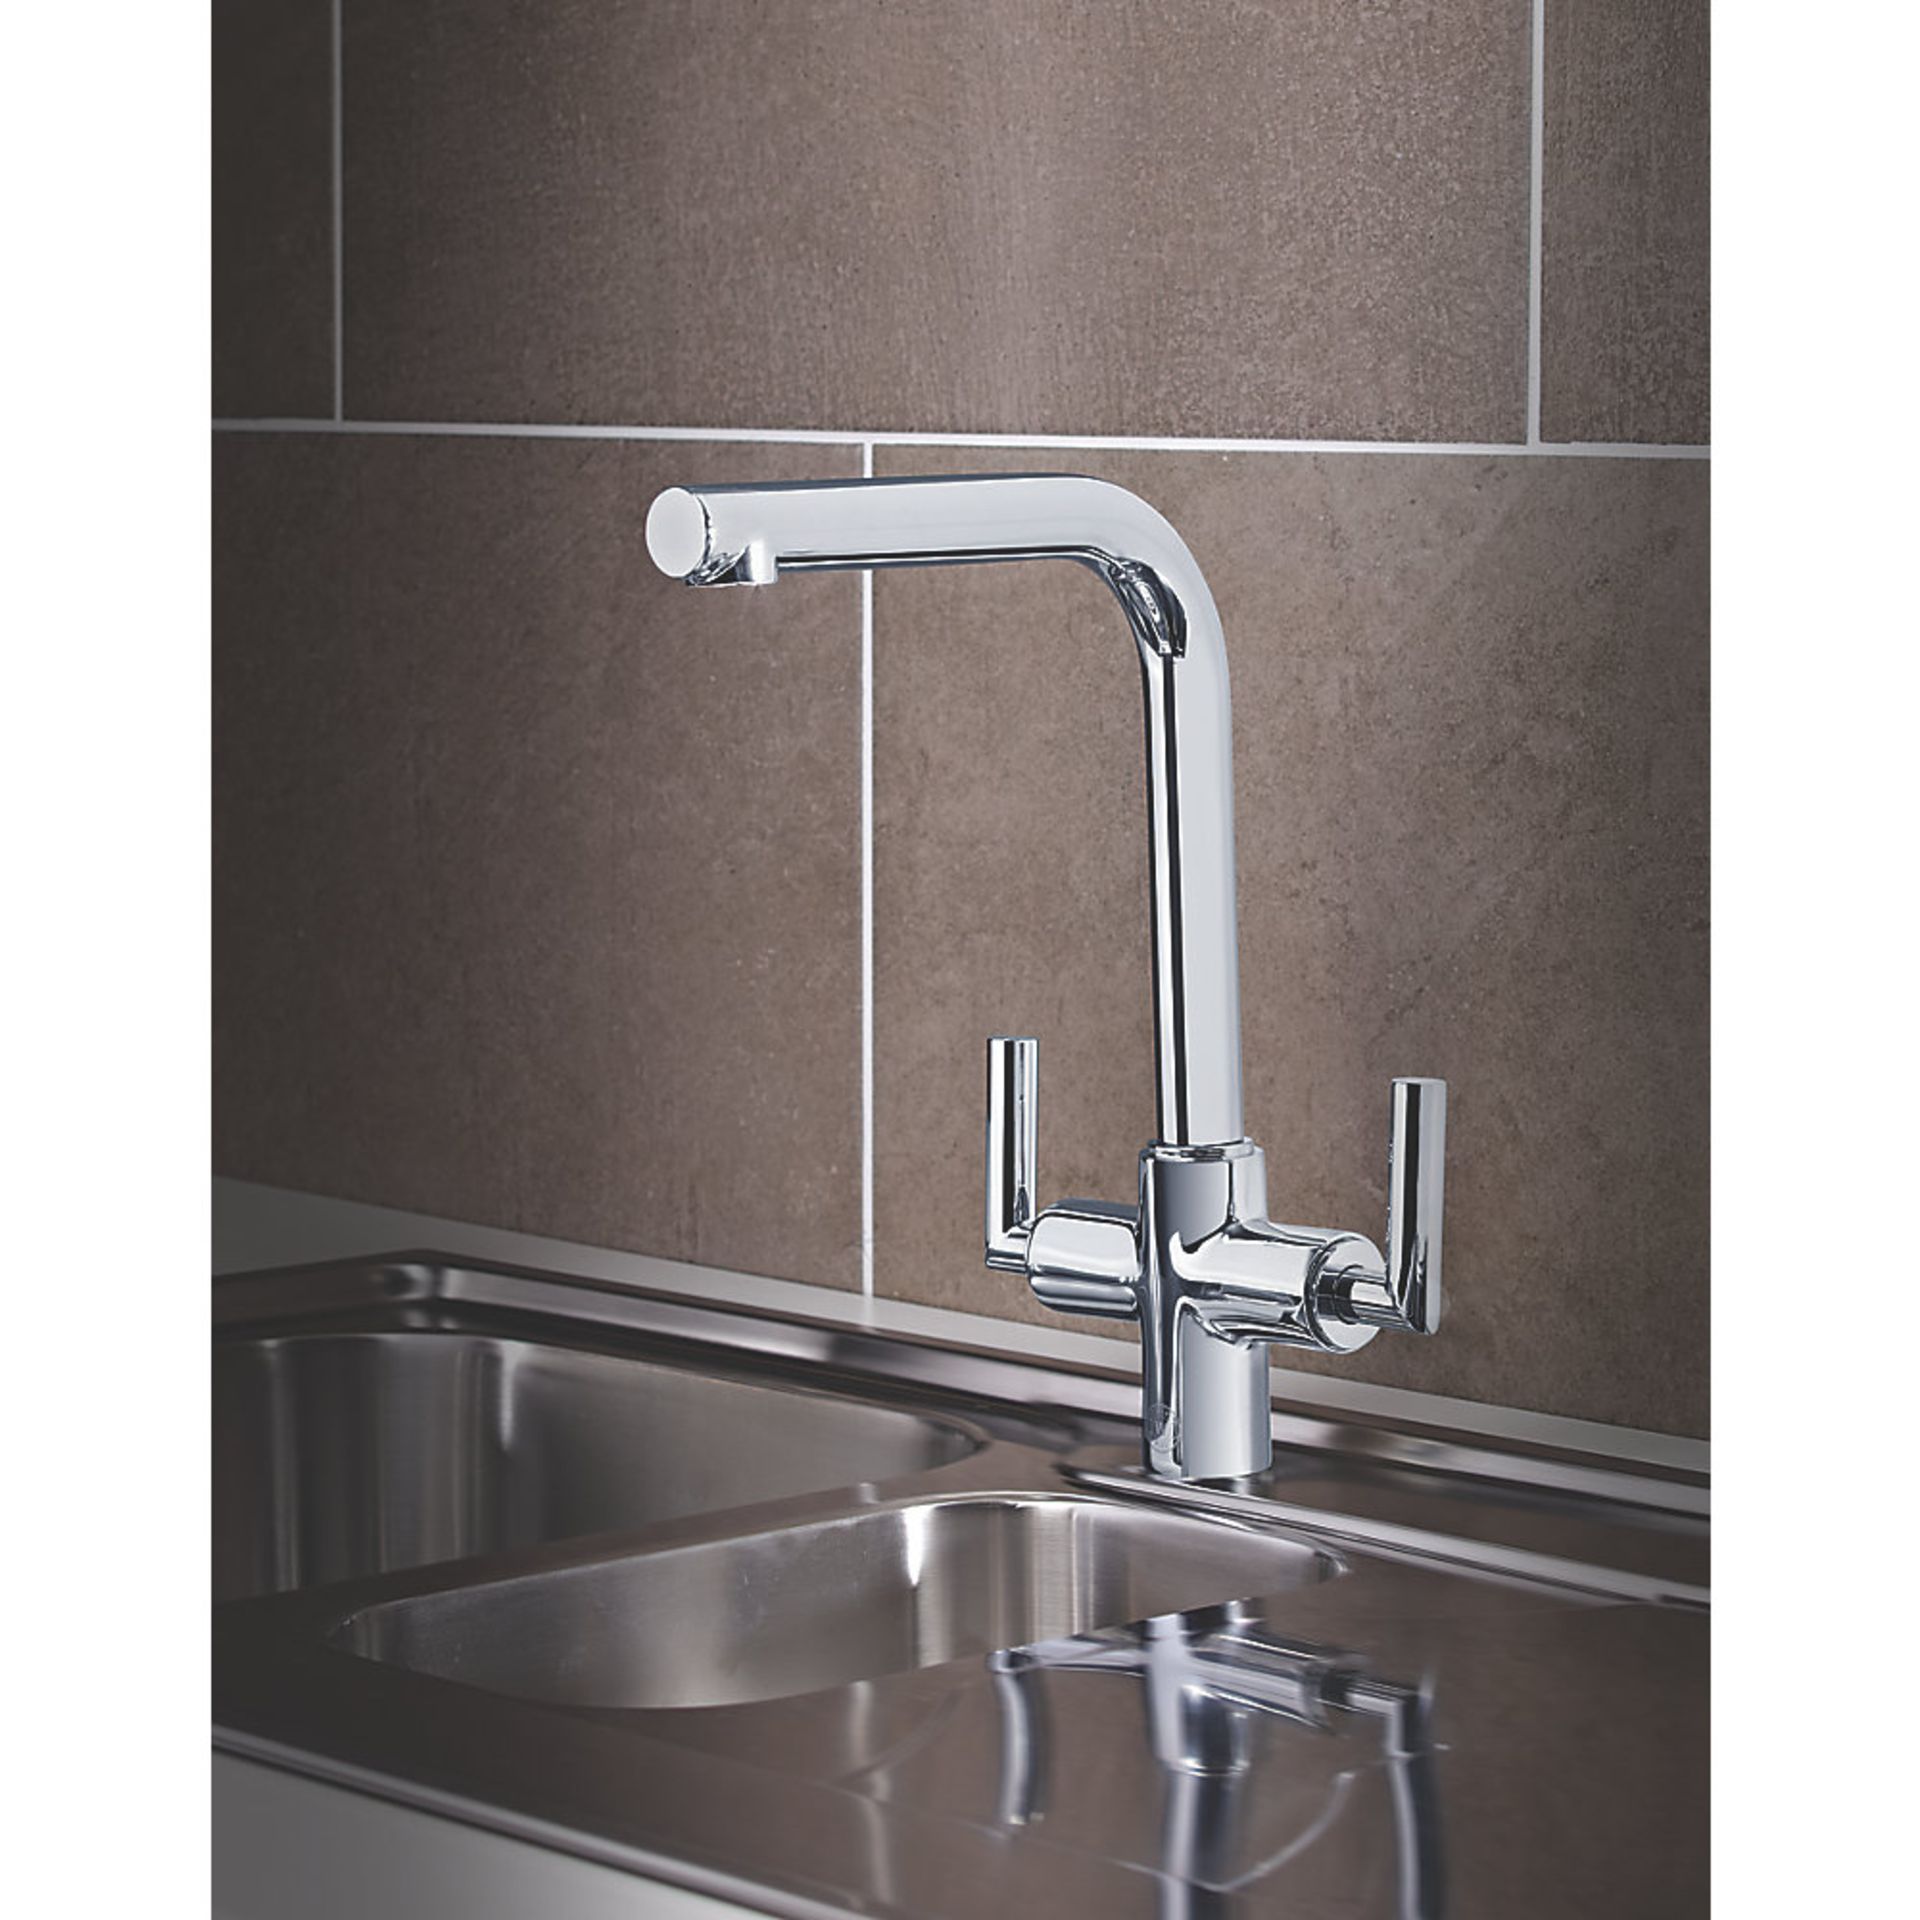 (XX130) Heritage Dolce Dual-Lever Mixer Tap Chrome. Double Lever Operation _ Turn Deck-Mount... - Image 3 of 3